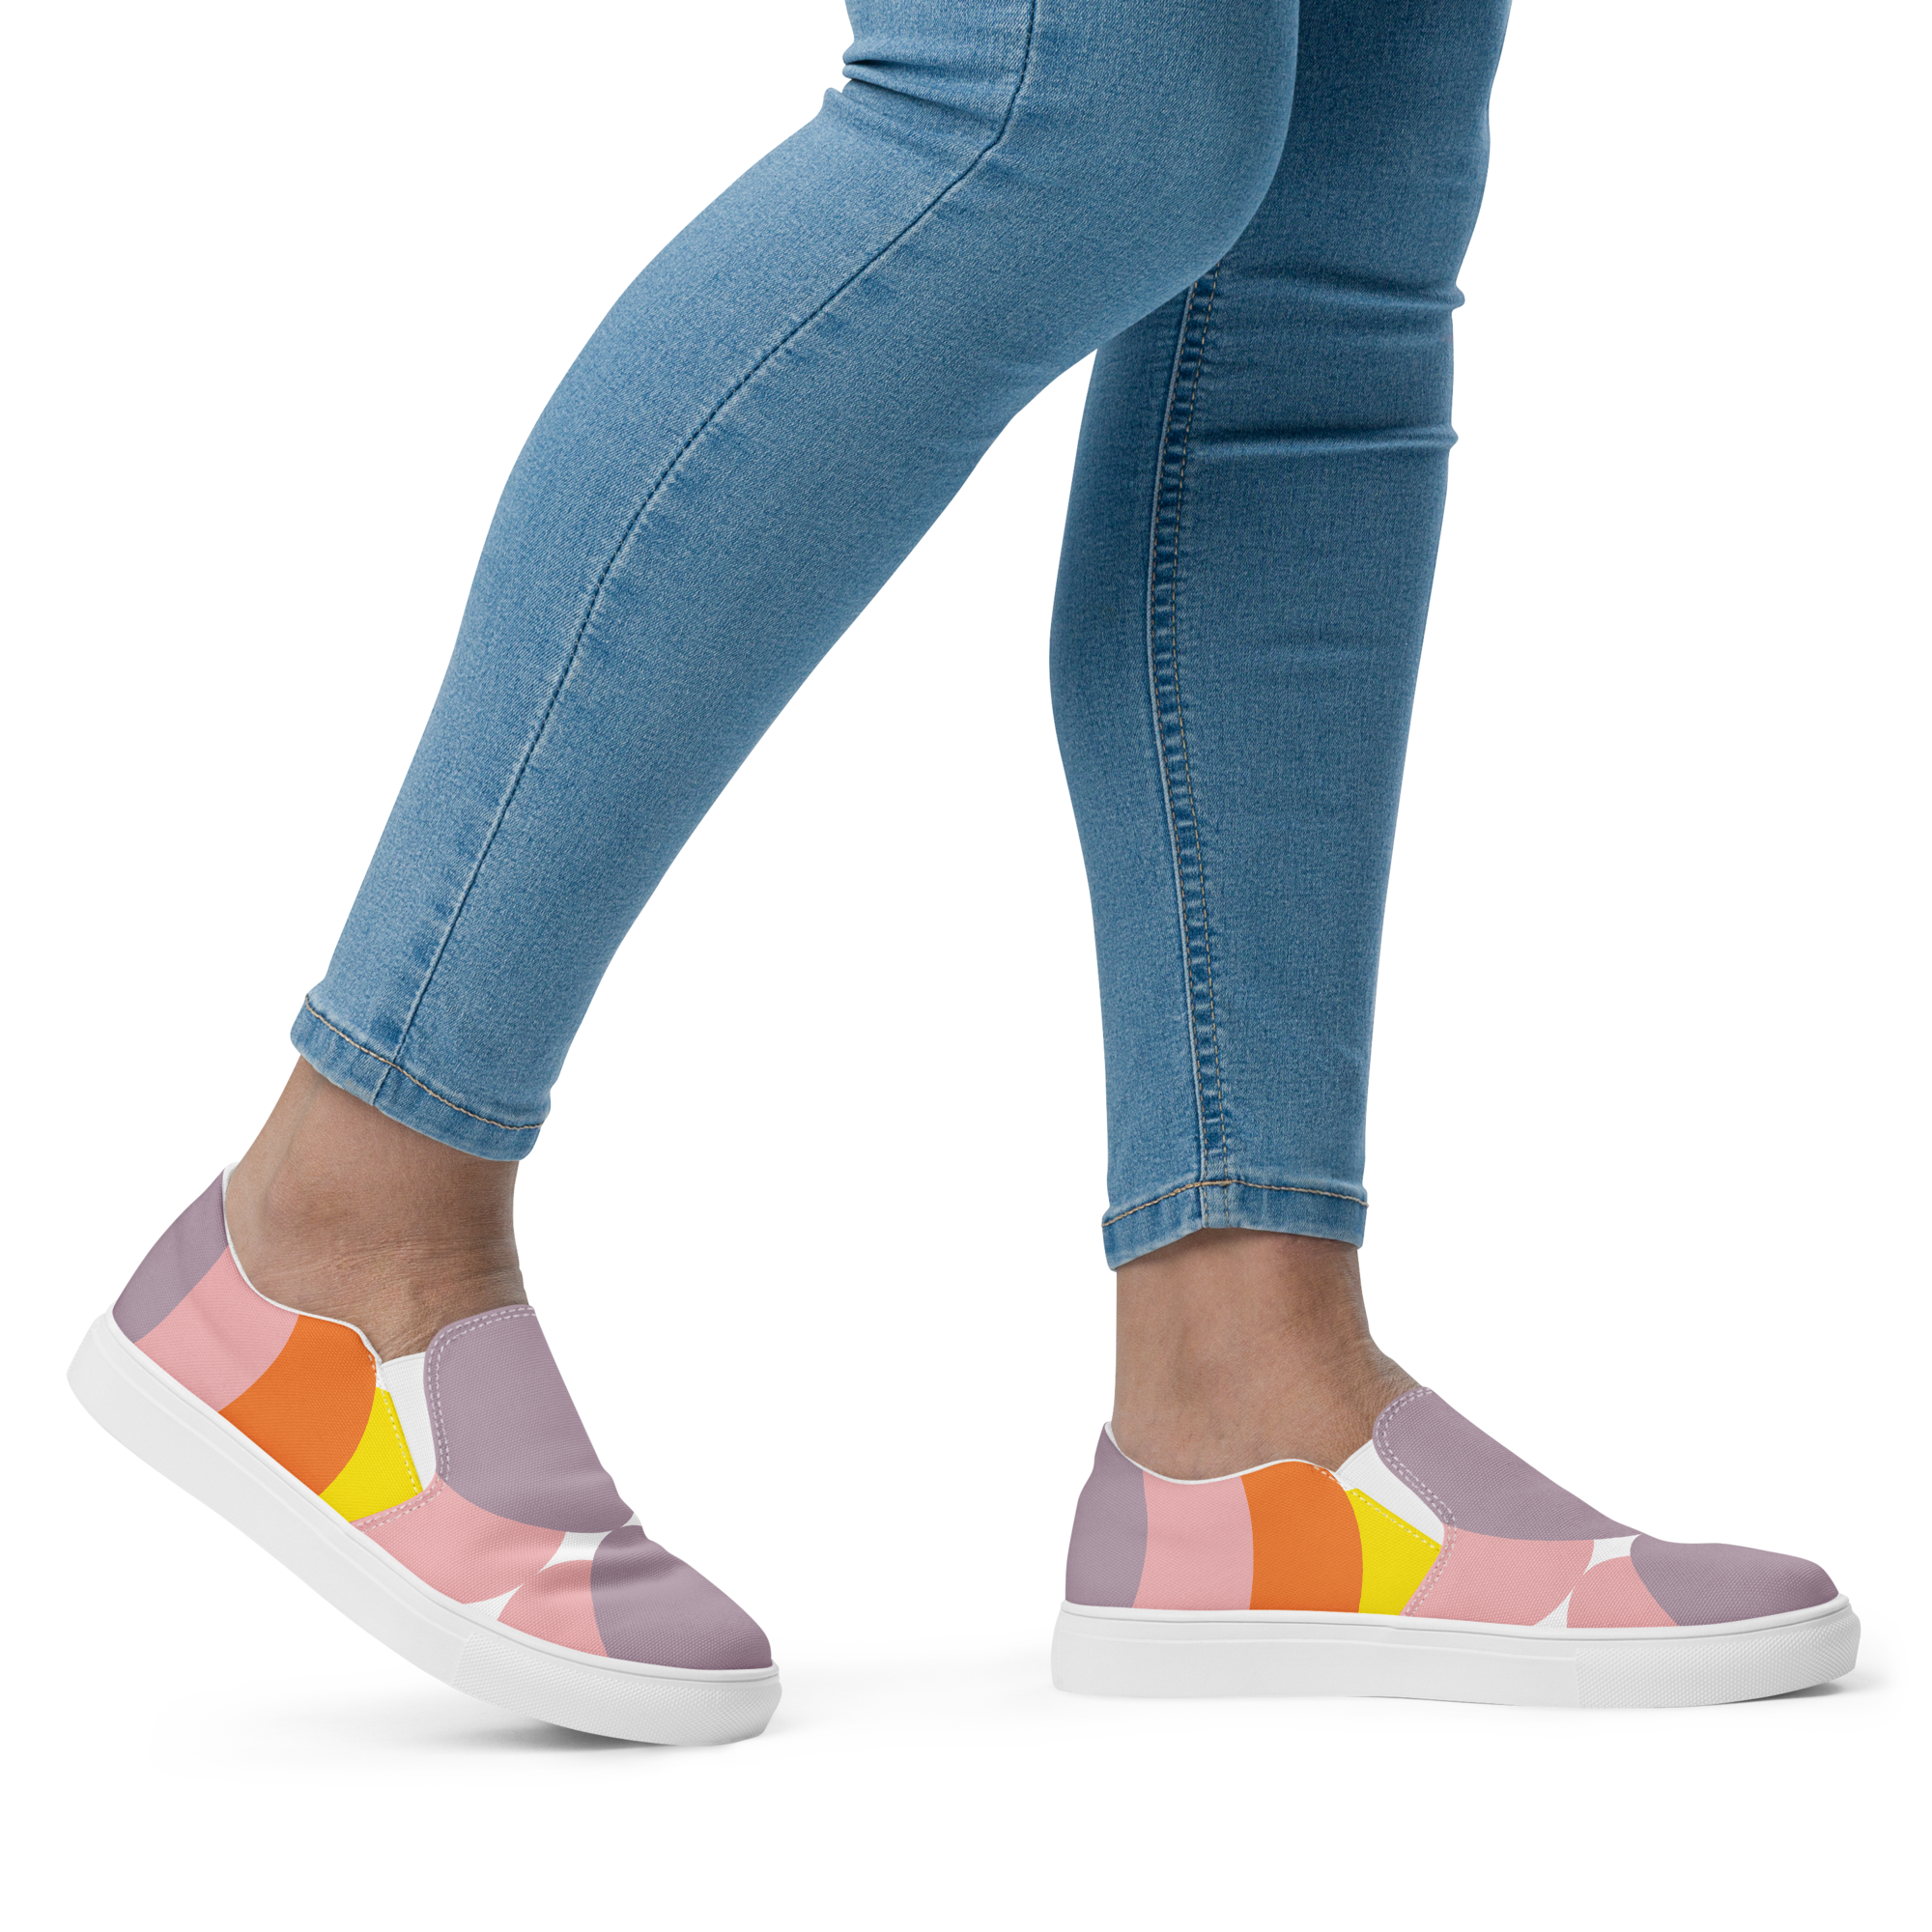 New Life | Women's Slip-On Canvas Shoes